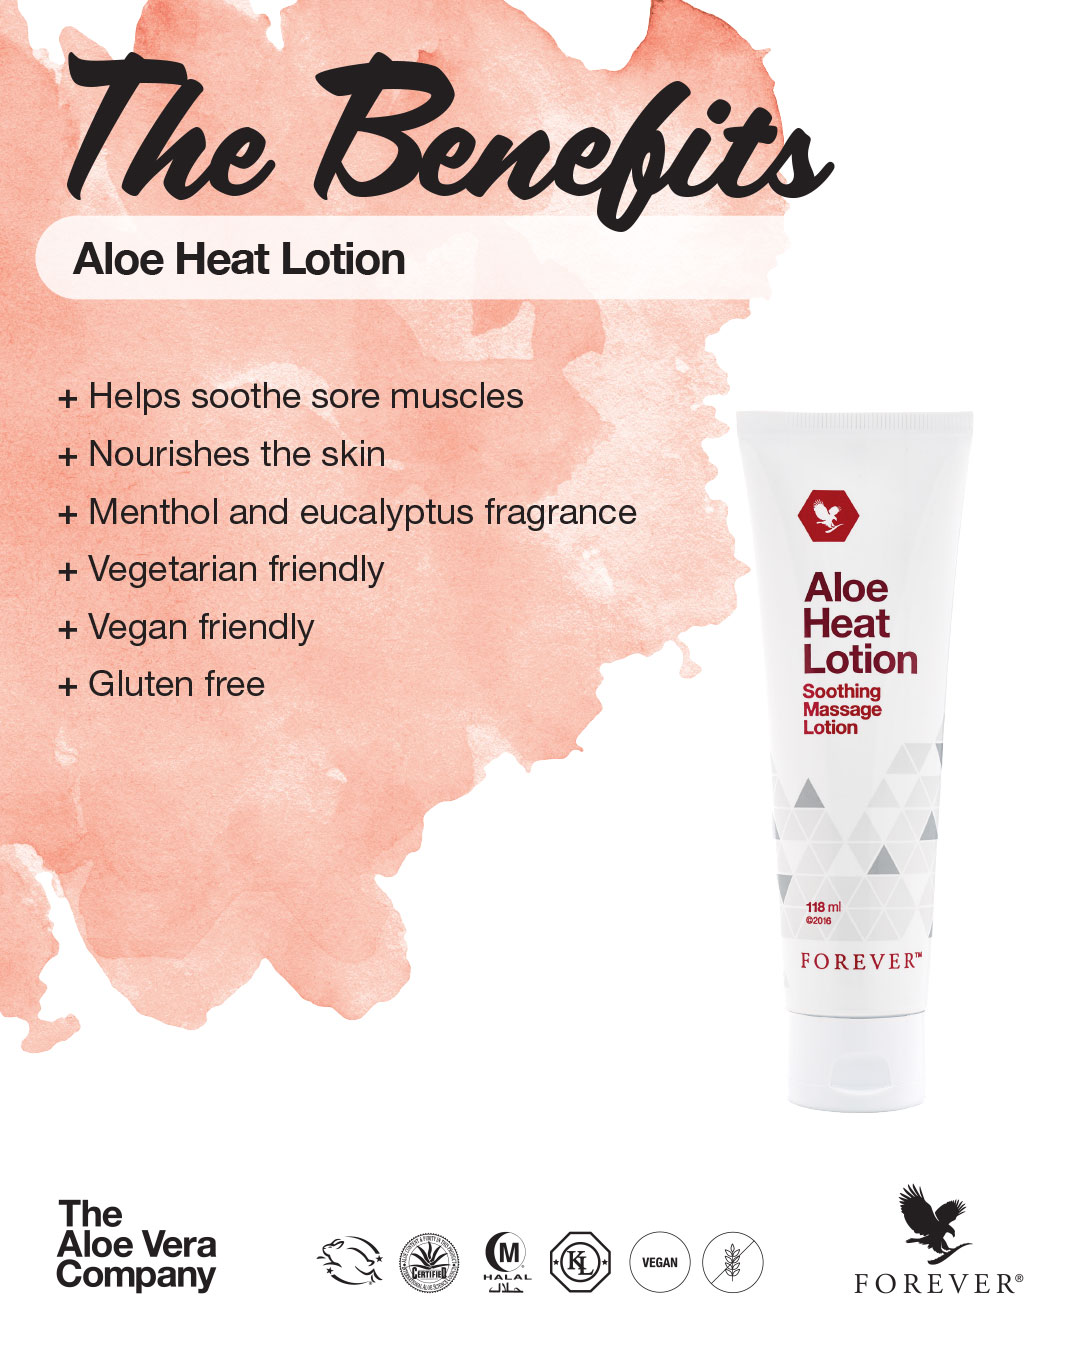 Forever Living on Twitter: "Relax and soothe your muscles with Aloe Heat  Lotion after a long day of work or a workout! https://t.co/1D1ps15Ben" /  Twitter